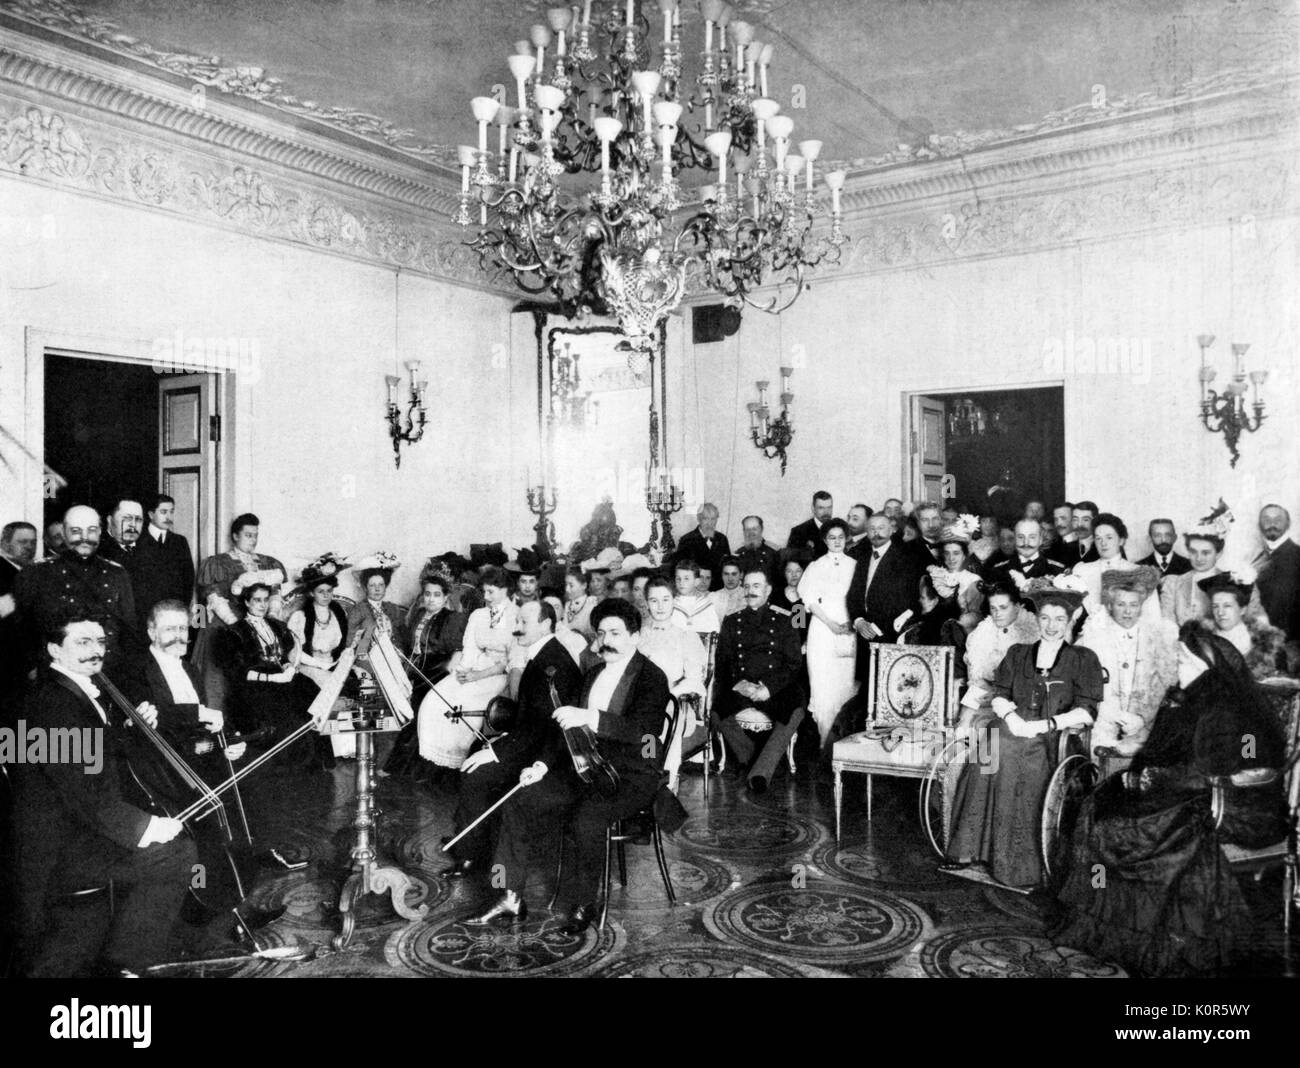 Russian music  matinée in pre-reolutionary St Petersburg /   Saint Petersburg at Duke of Mecklembourg.  Quartet includes Sigis Butkiewitch,  Alex Borneman, Naun Kranz, B. Kamensky .  With  Cesar Cui in the front row Musical gathering in Tsarist Russia c.1908 Stock Photo